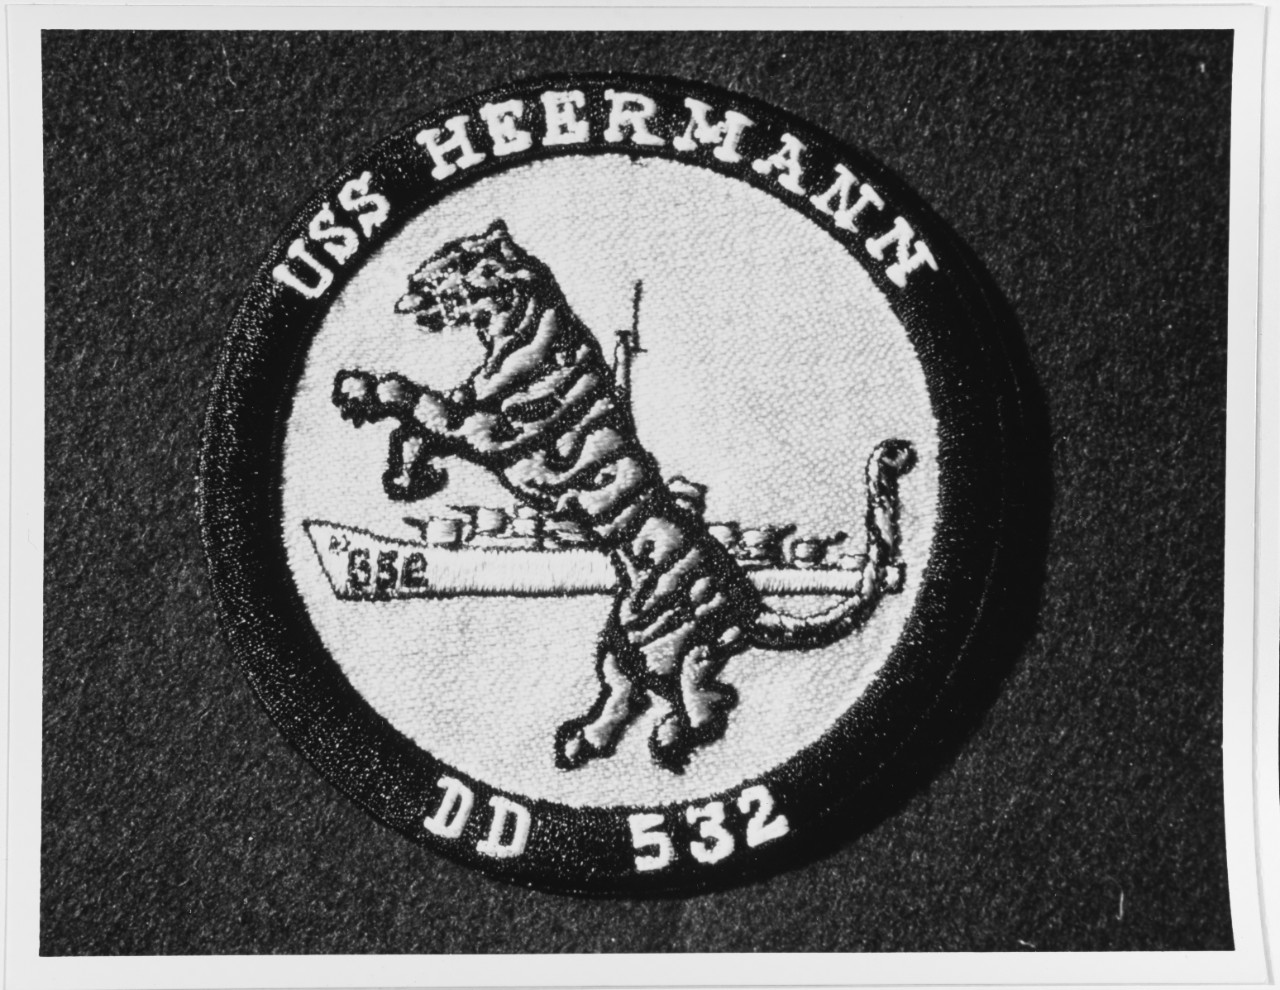 Heermann emblem in use circa 1957. (Naval History and Heritage Command Photograph NH 78949-KN)